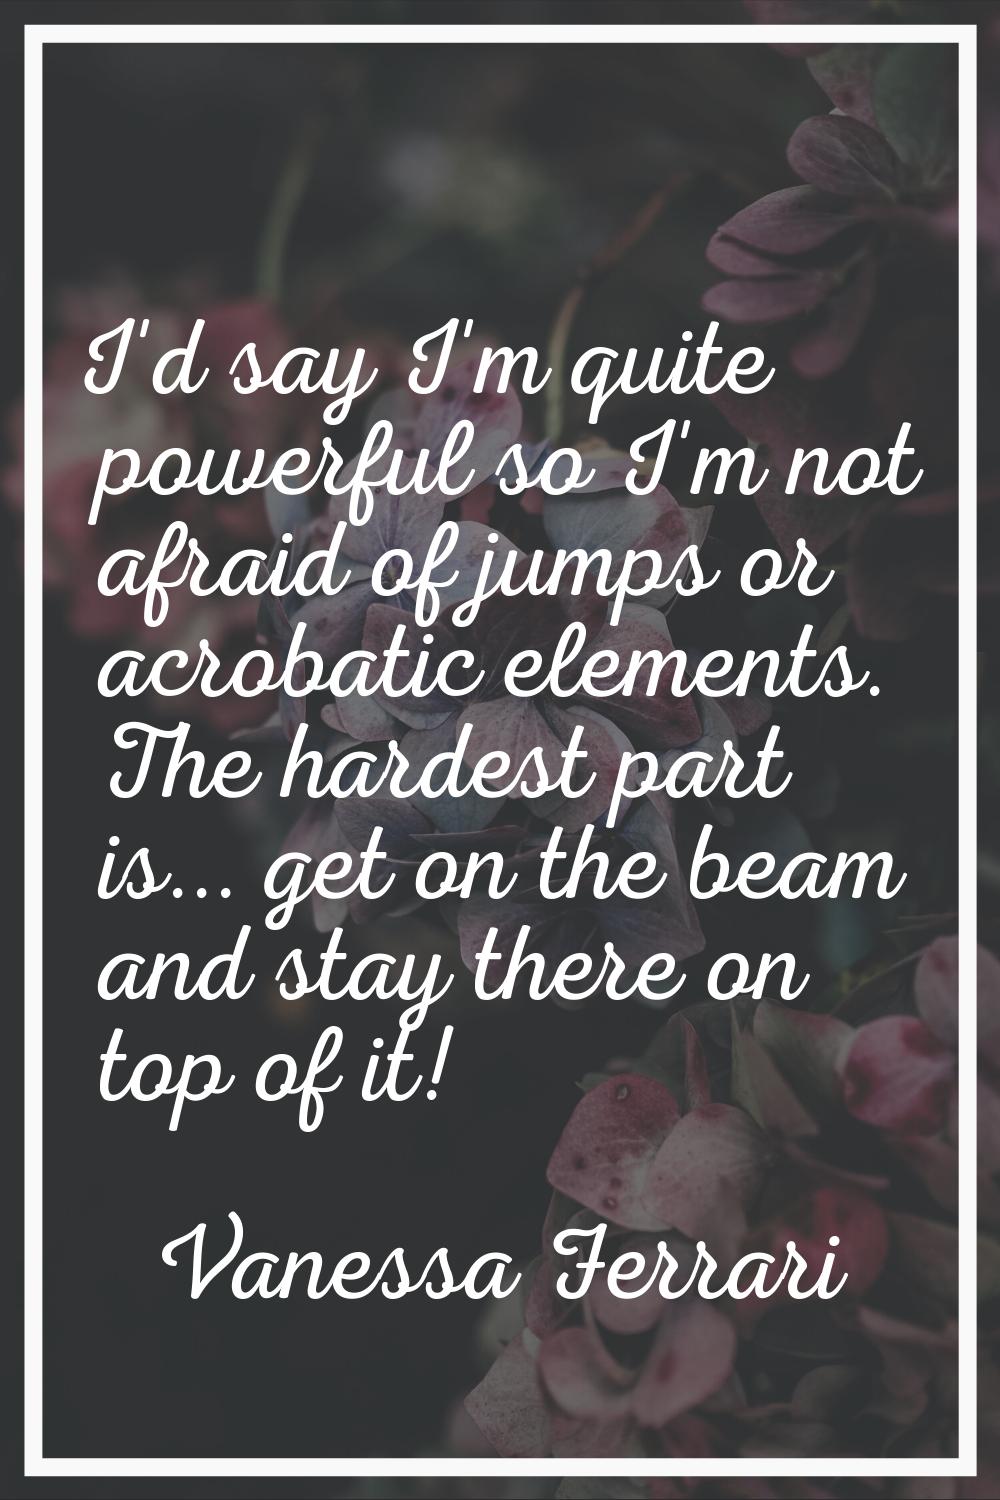 I'd say I'm quite powerful so I'm not afraid of jumps or acrobatic elements. The hardest part is...